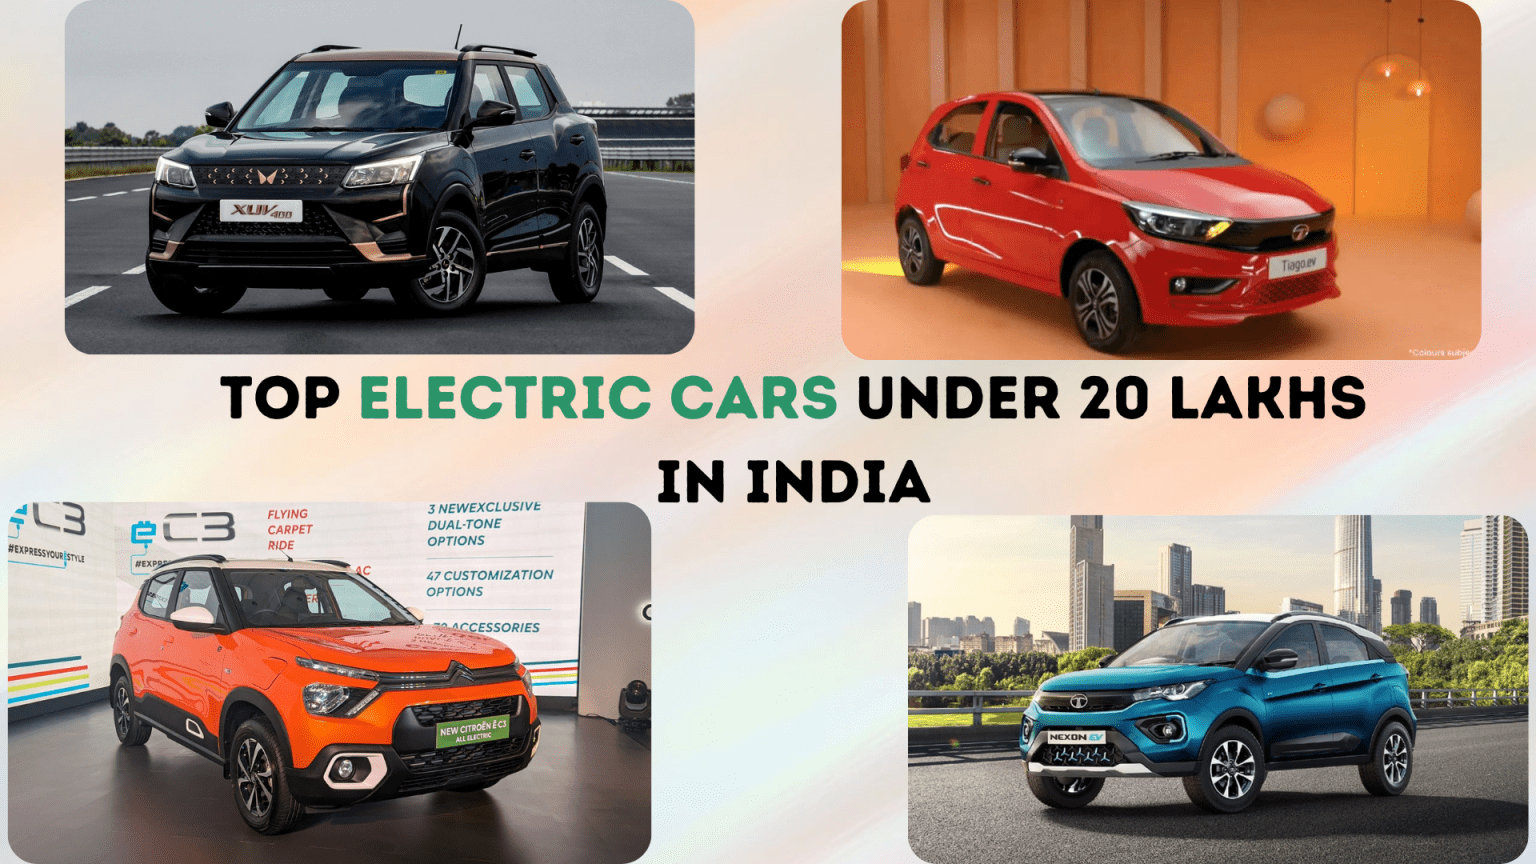 Top 7 Electric Cars Under 20 Lakhs in India EVehicleinfo